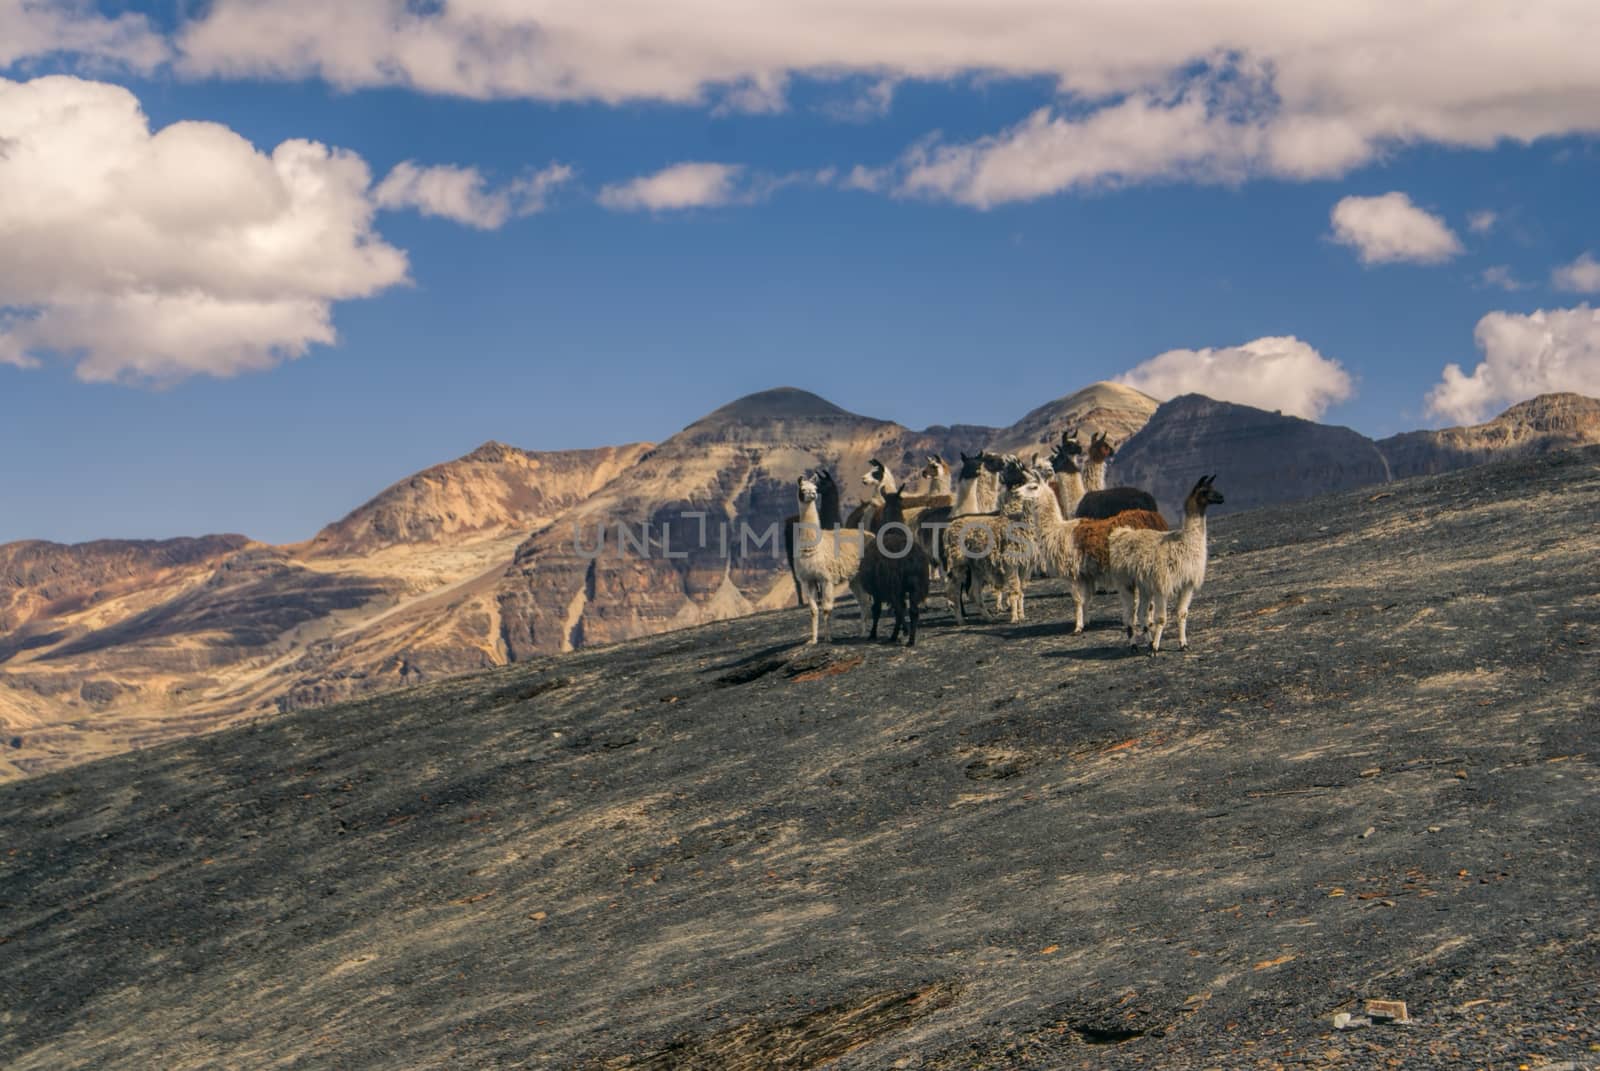 Herd of wild llamas high in the Andes mountains in Bolivia, Choro trek